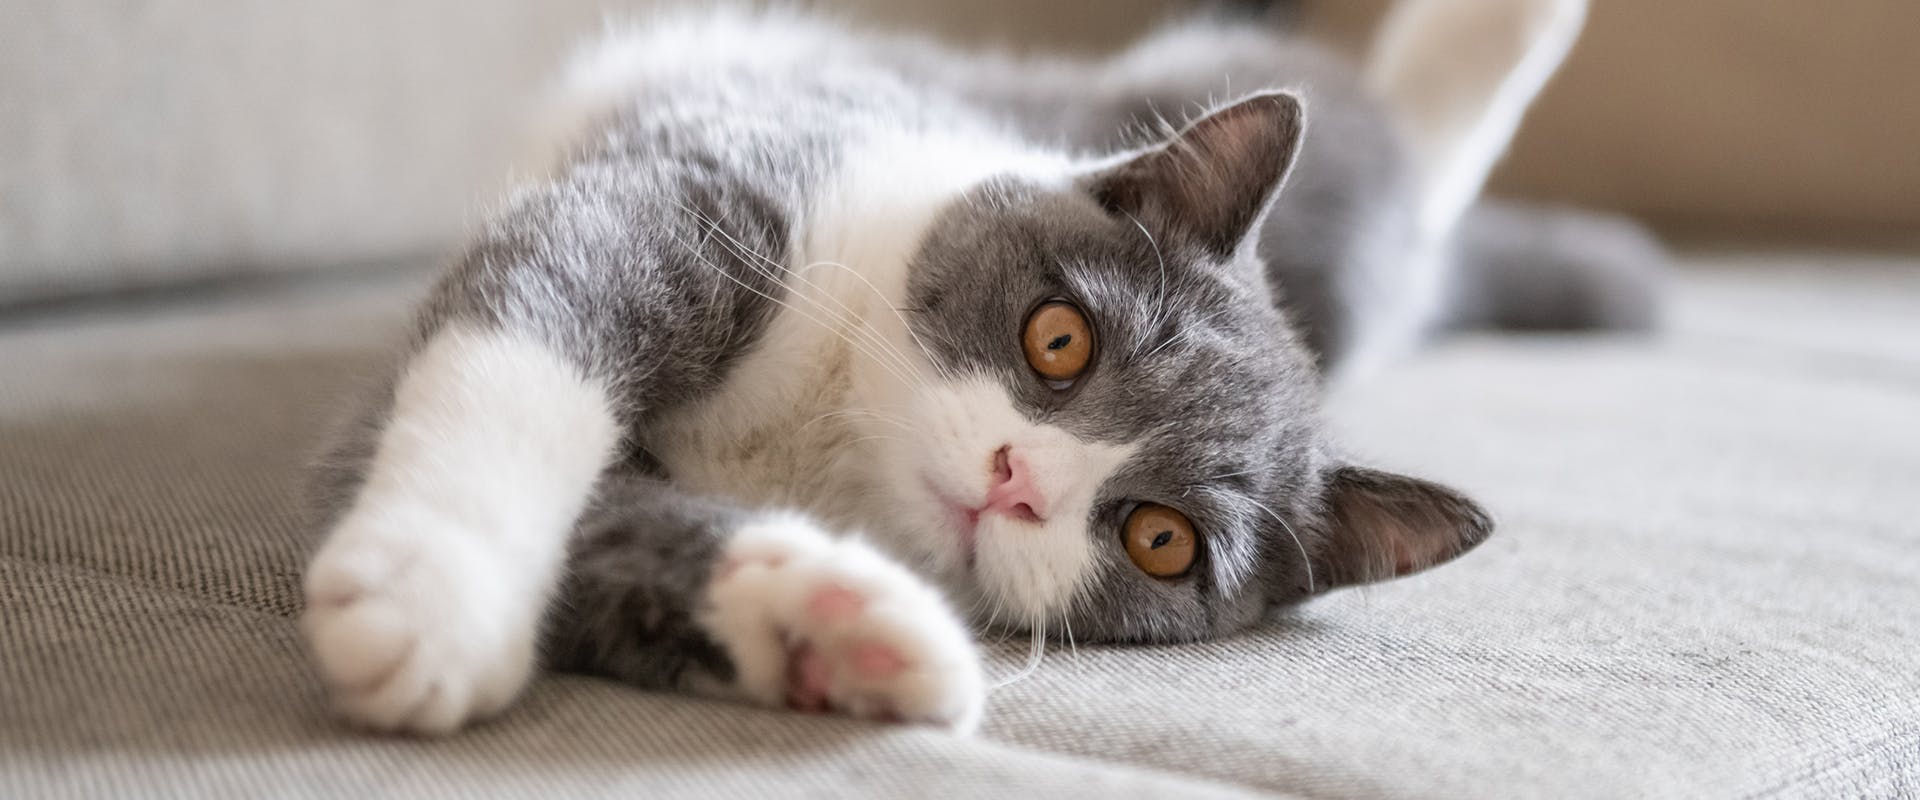 A gray and white cat stretching out on a sofa